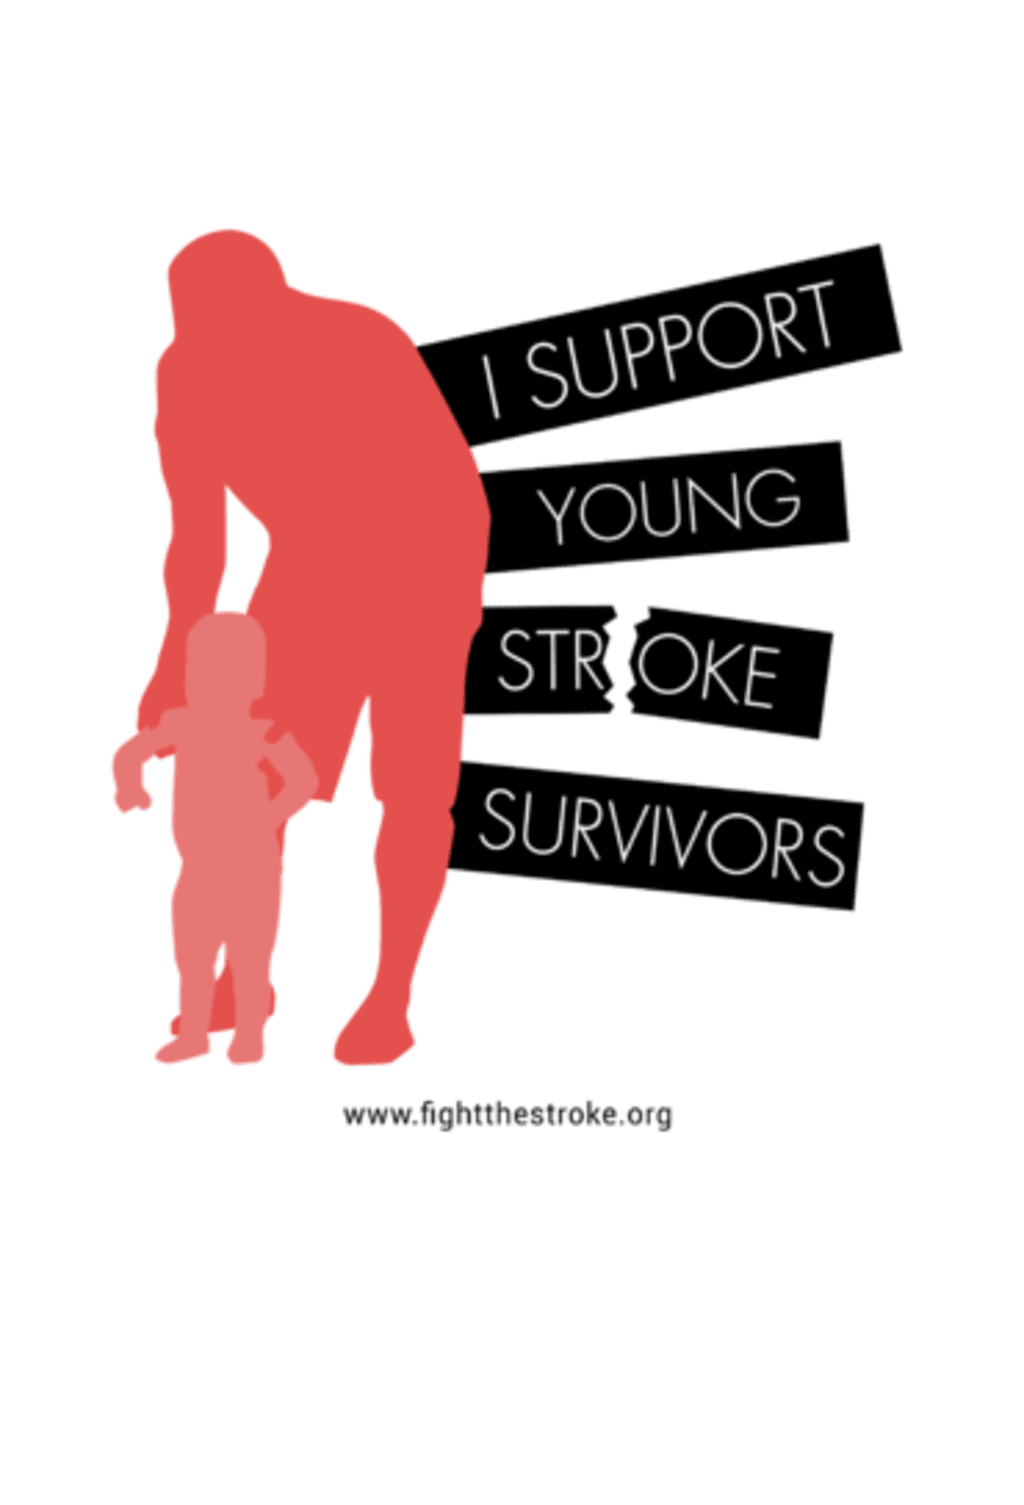 Support young stroke survivors bianca